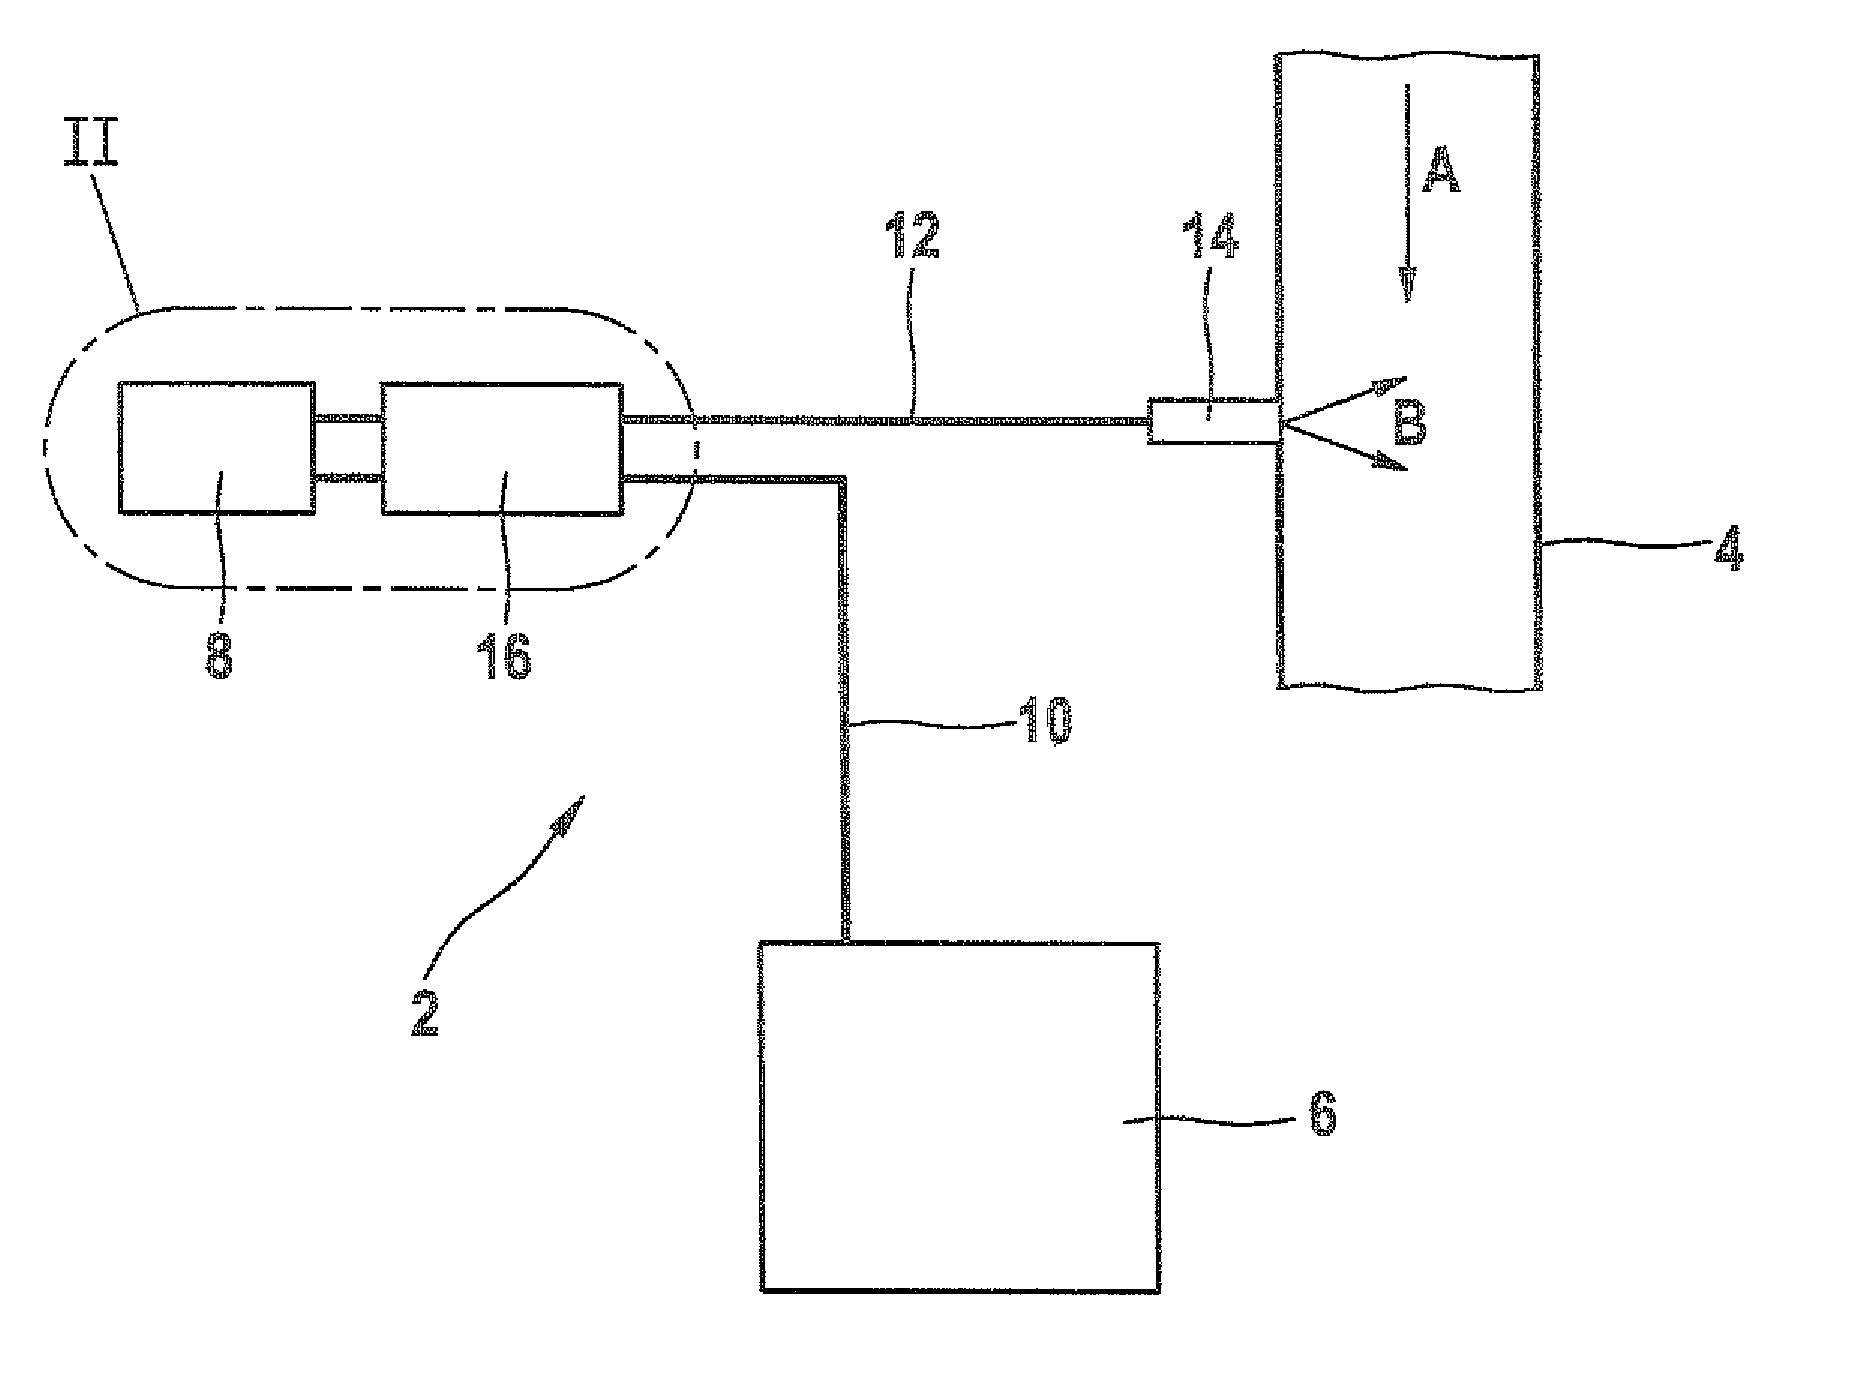 Device for delivering a reducing agent to an exhaust system of an internal combustion engine